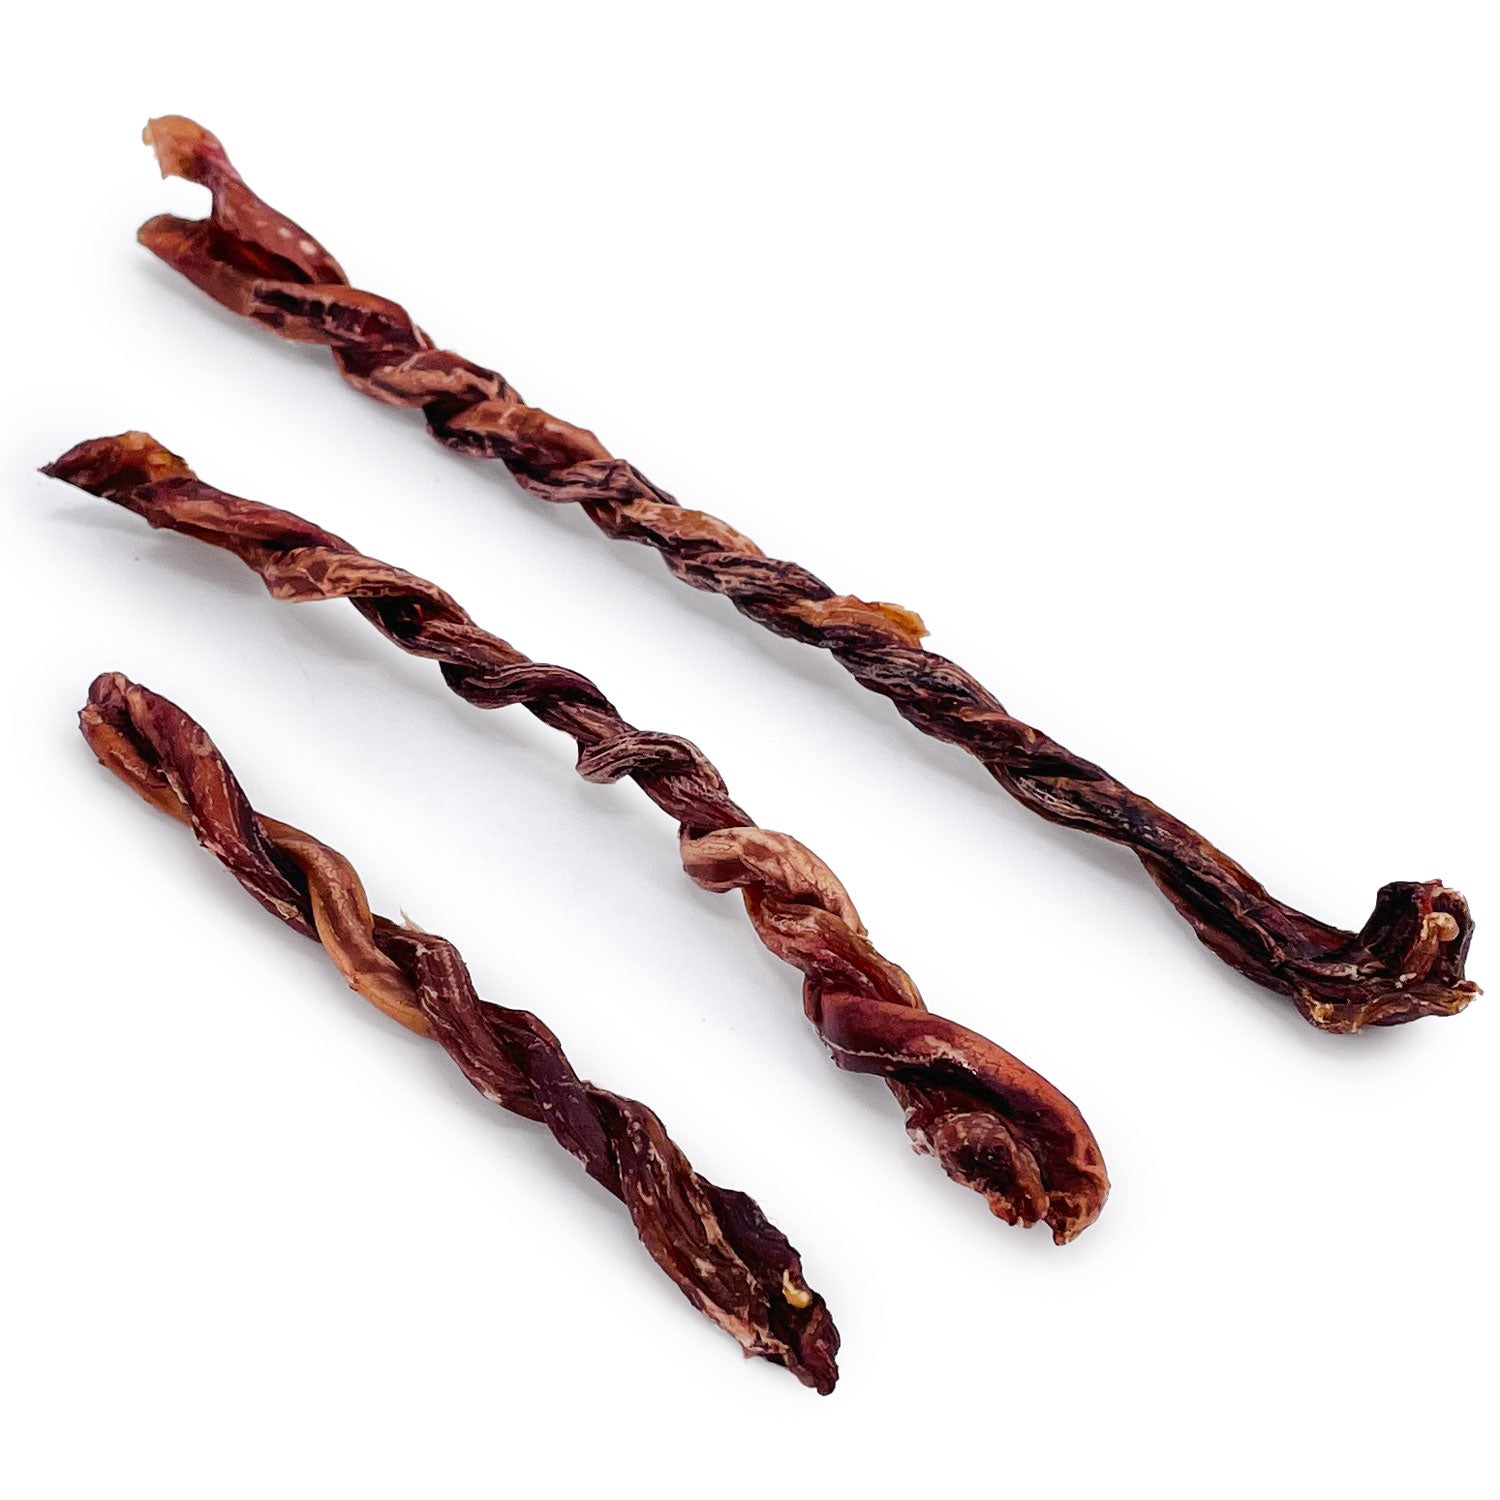 ValueBull USA Pork Pizzle Twists for Dogs, 5-10", 300 ct BULK PACK